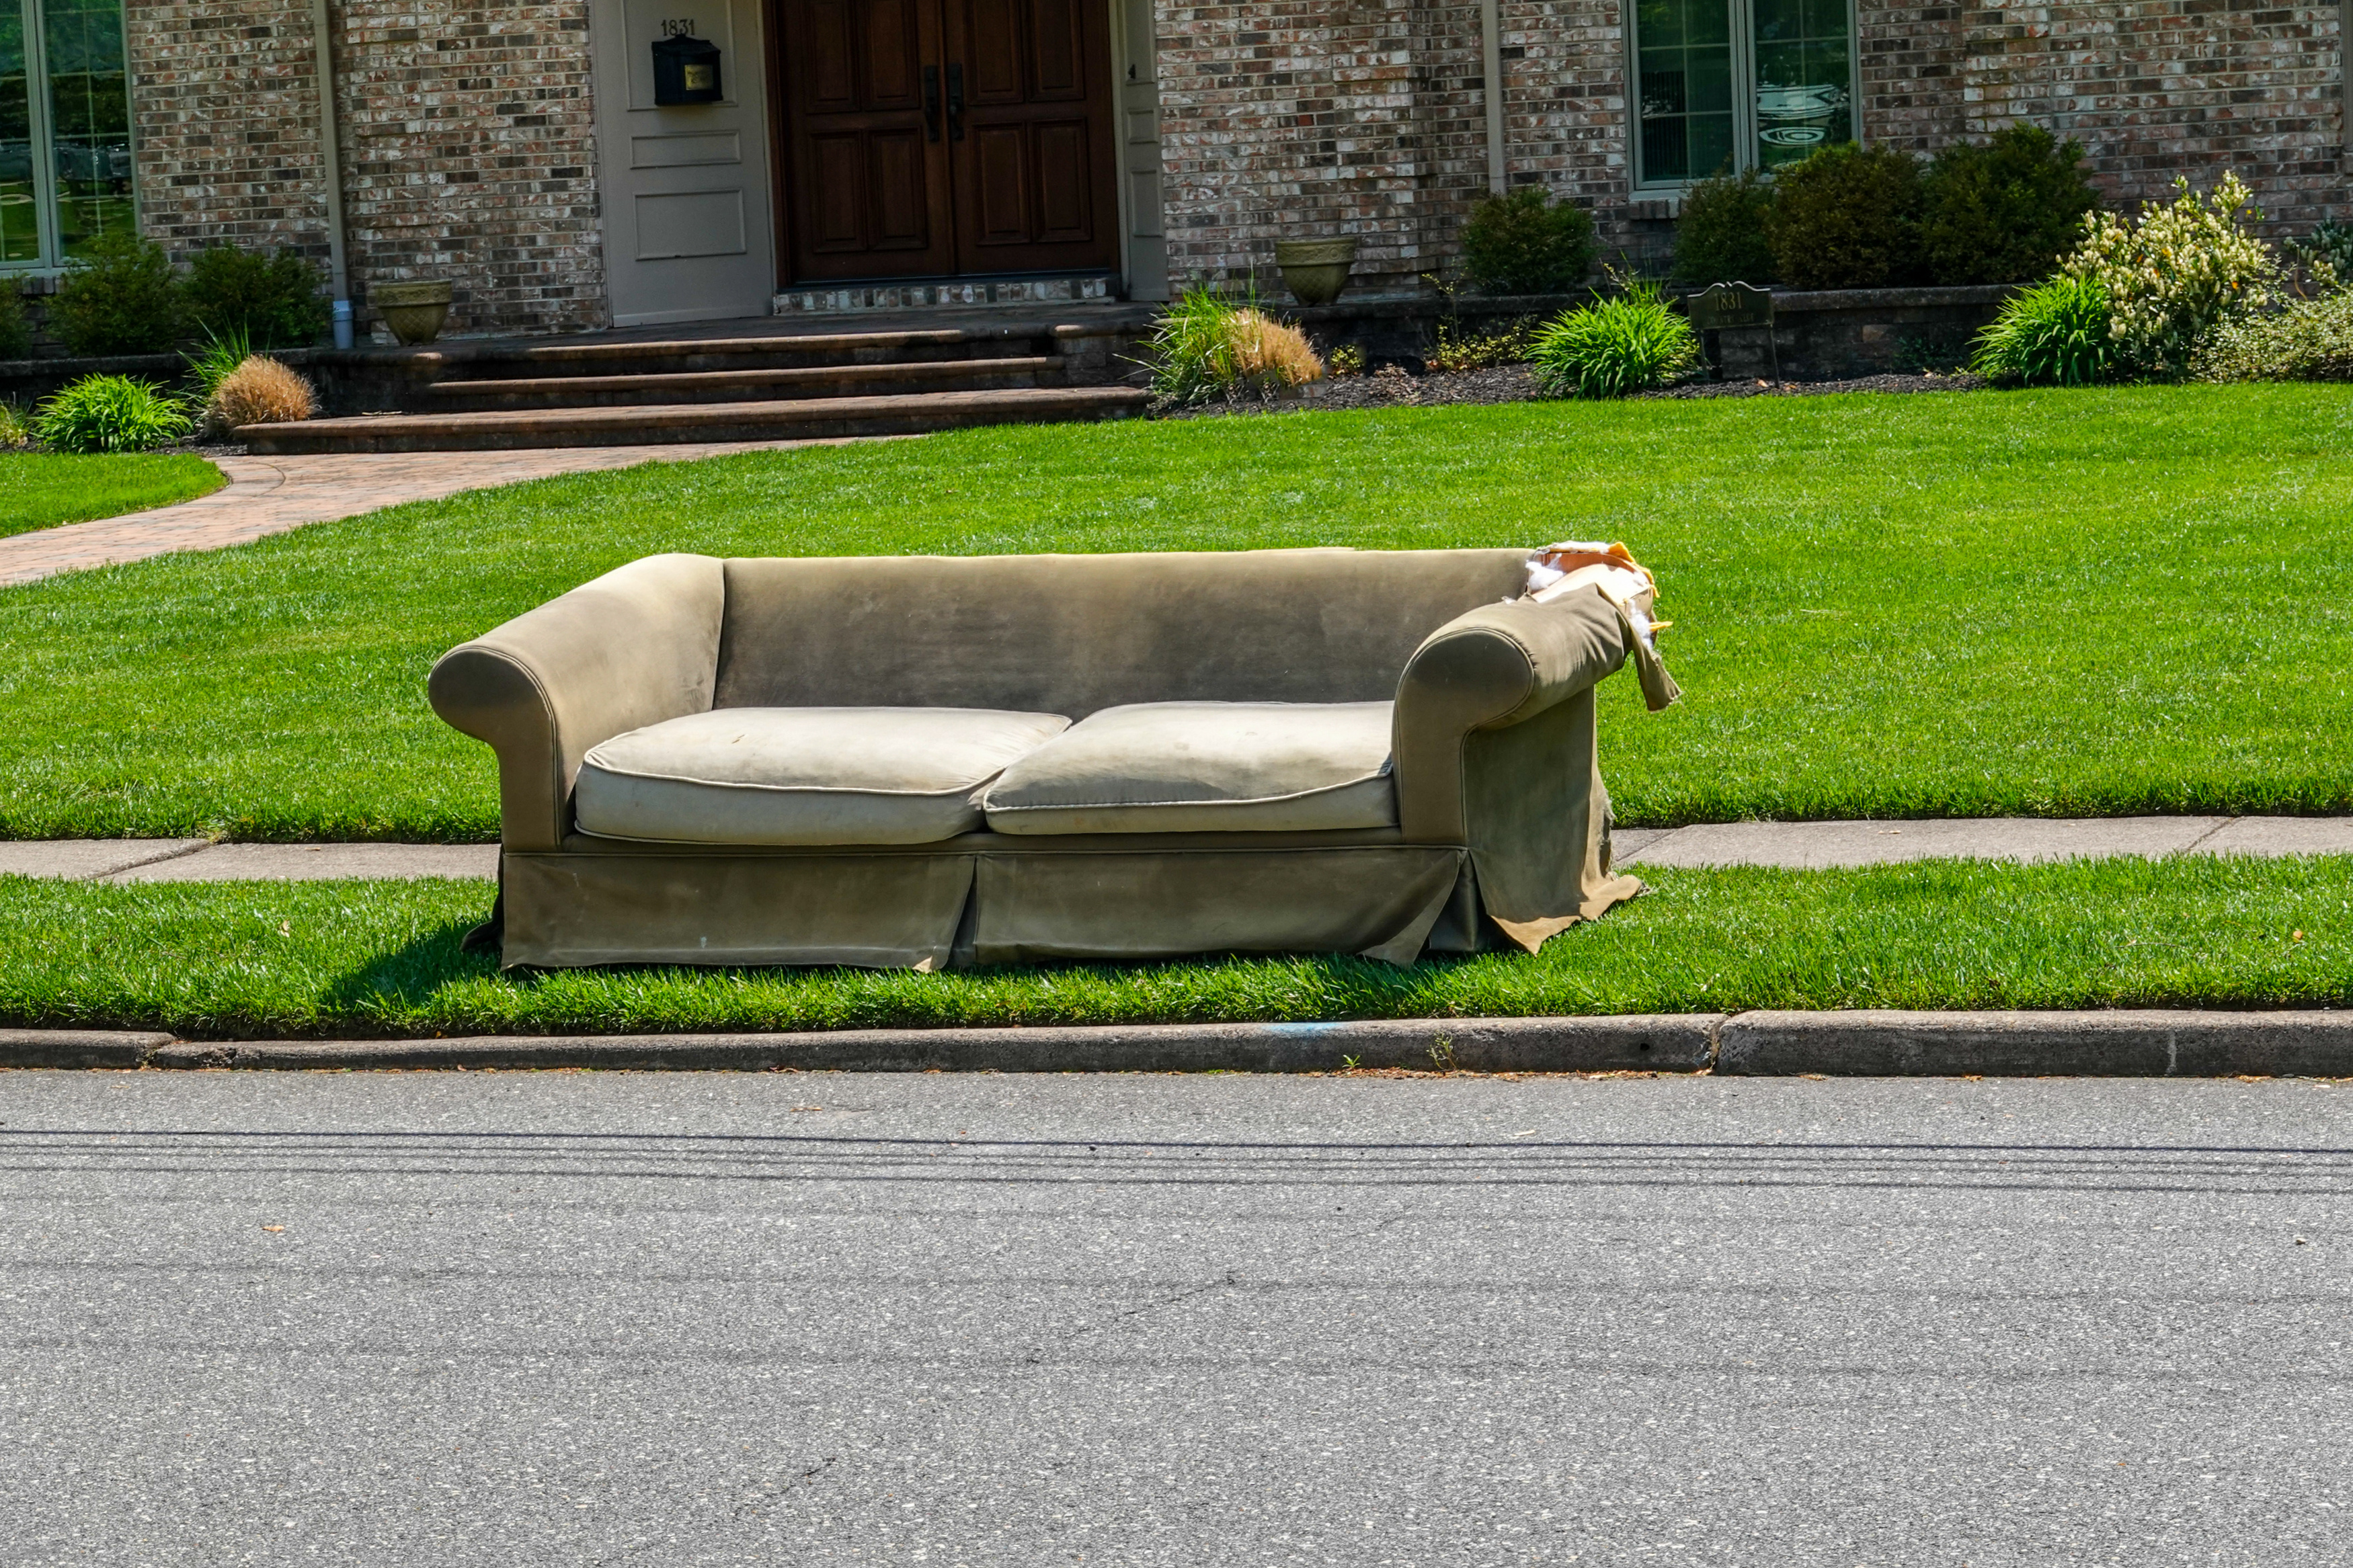 Couch at curbside